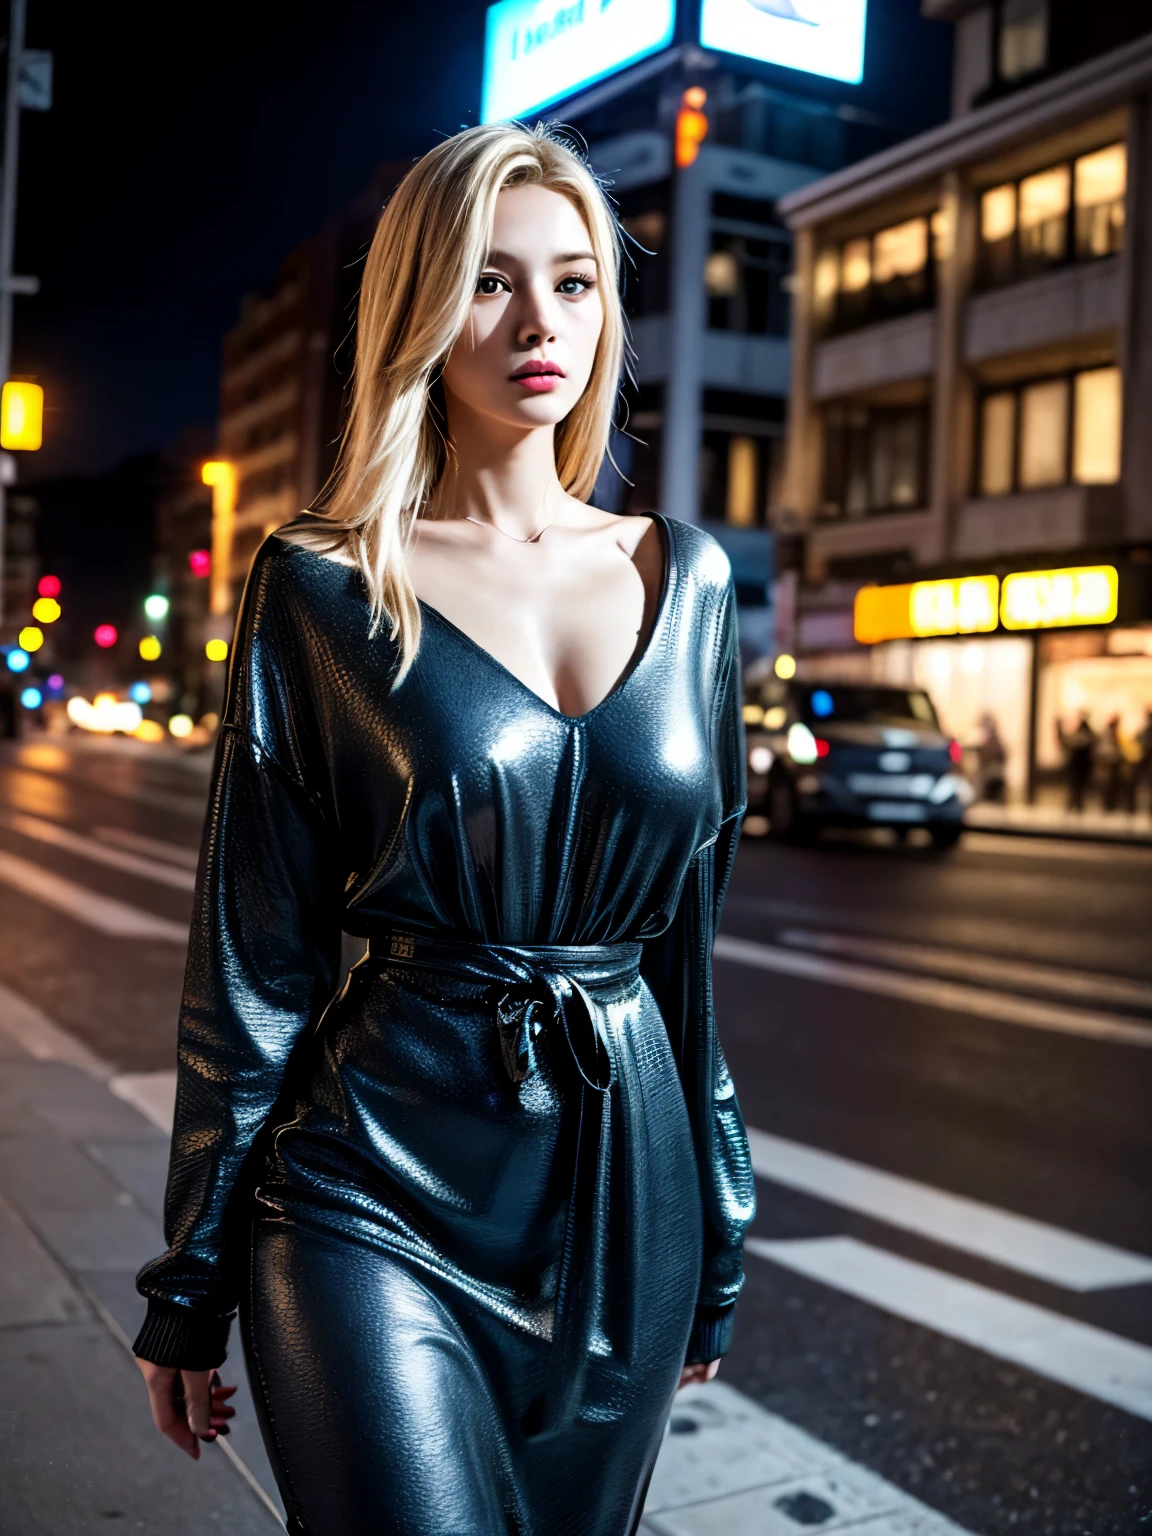 best quality, masterpiece, realistic photo, intricate details, raw photo, ultra detailed, modern young woman, with casual, edgy style outfit, no necklines, blonde hair, perfect detailed and blue eyes, walking in city at night, HD quality, 8K, young woman, 20 years old